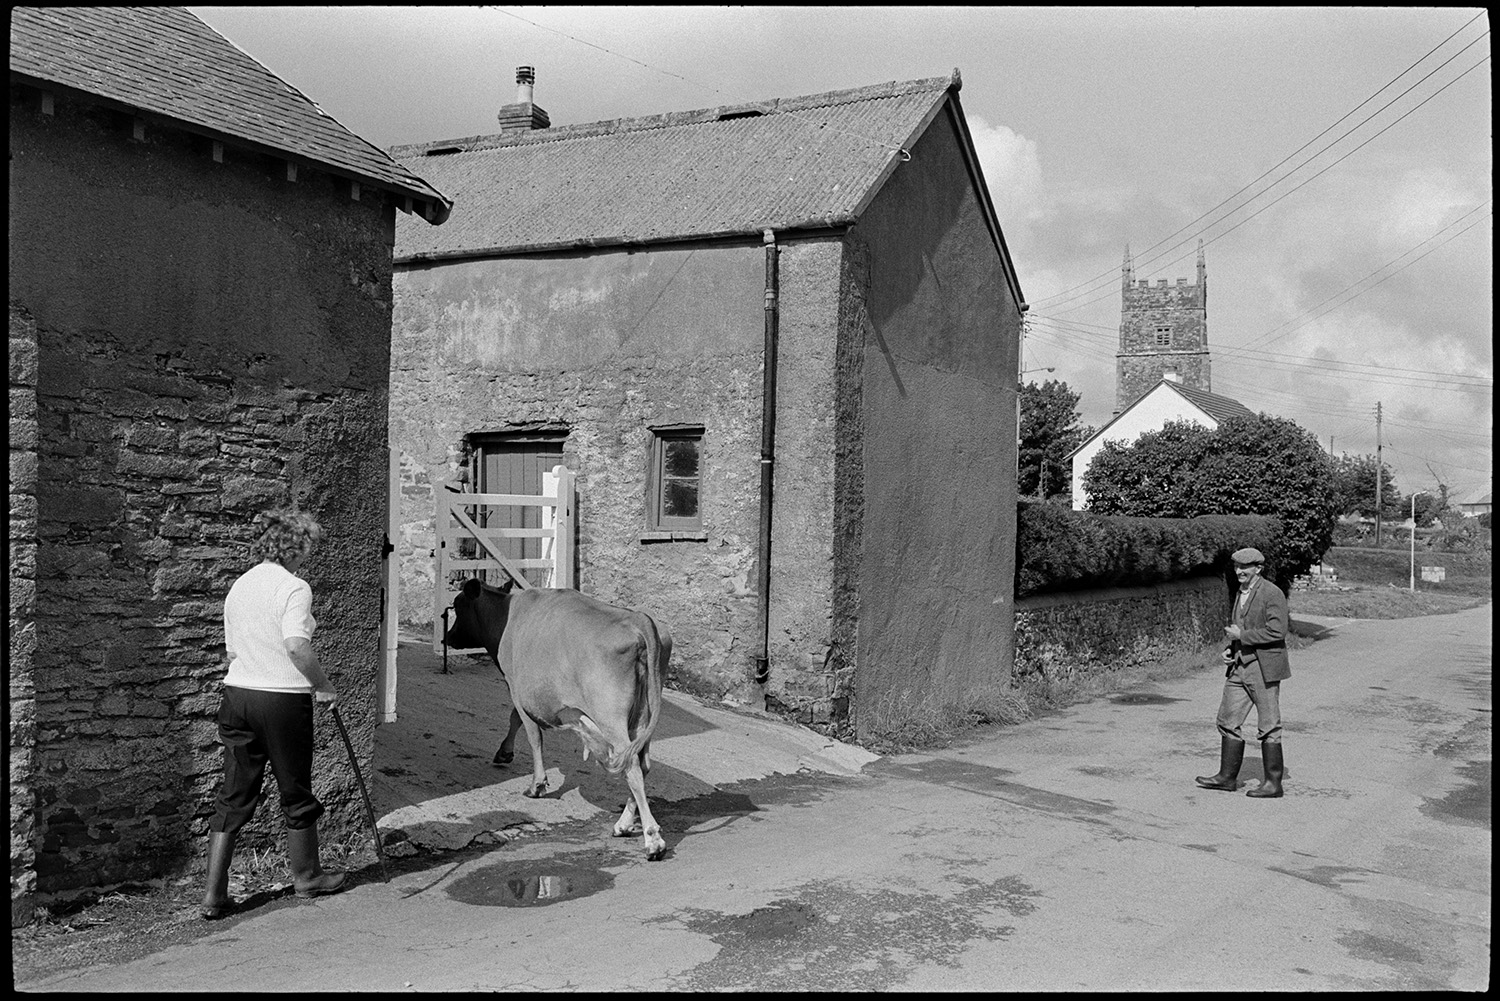 Cows in village, going to be milked. 
[A man and woman herding a cow into a farmyard to be milked at Bondleigh. The tower of Bondleigh Church can be seen in the background.]